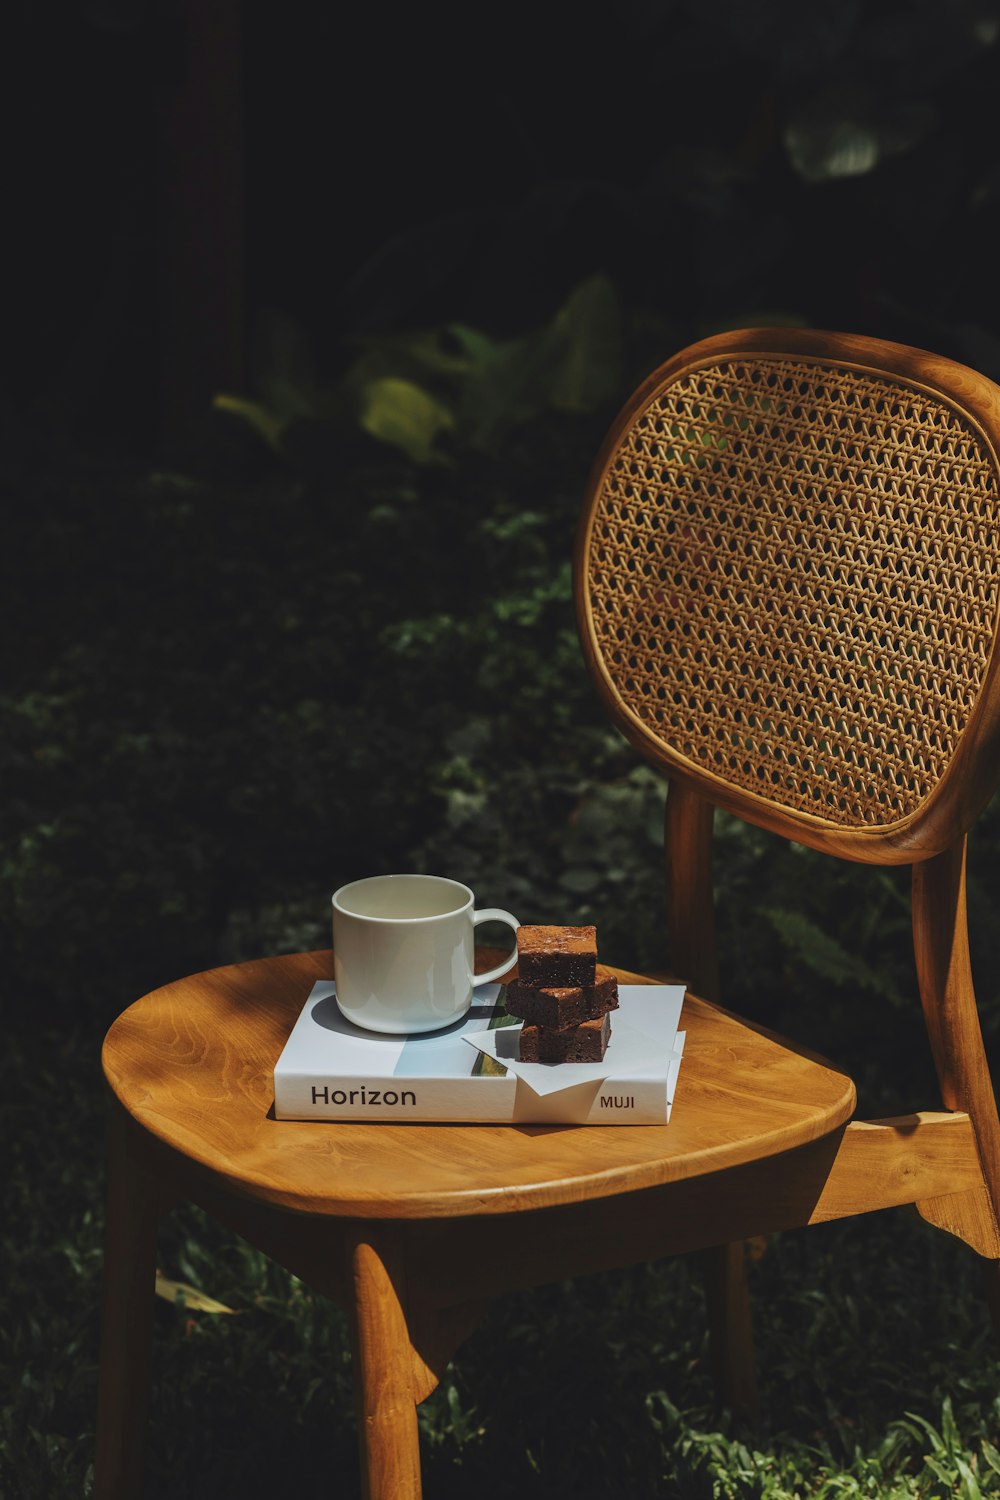 a wooden chair with a book and a cup on it